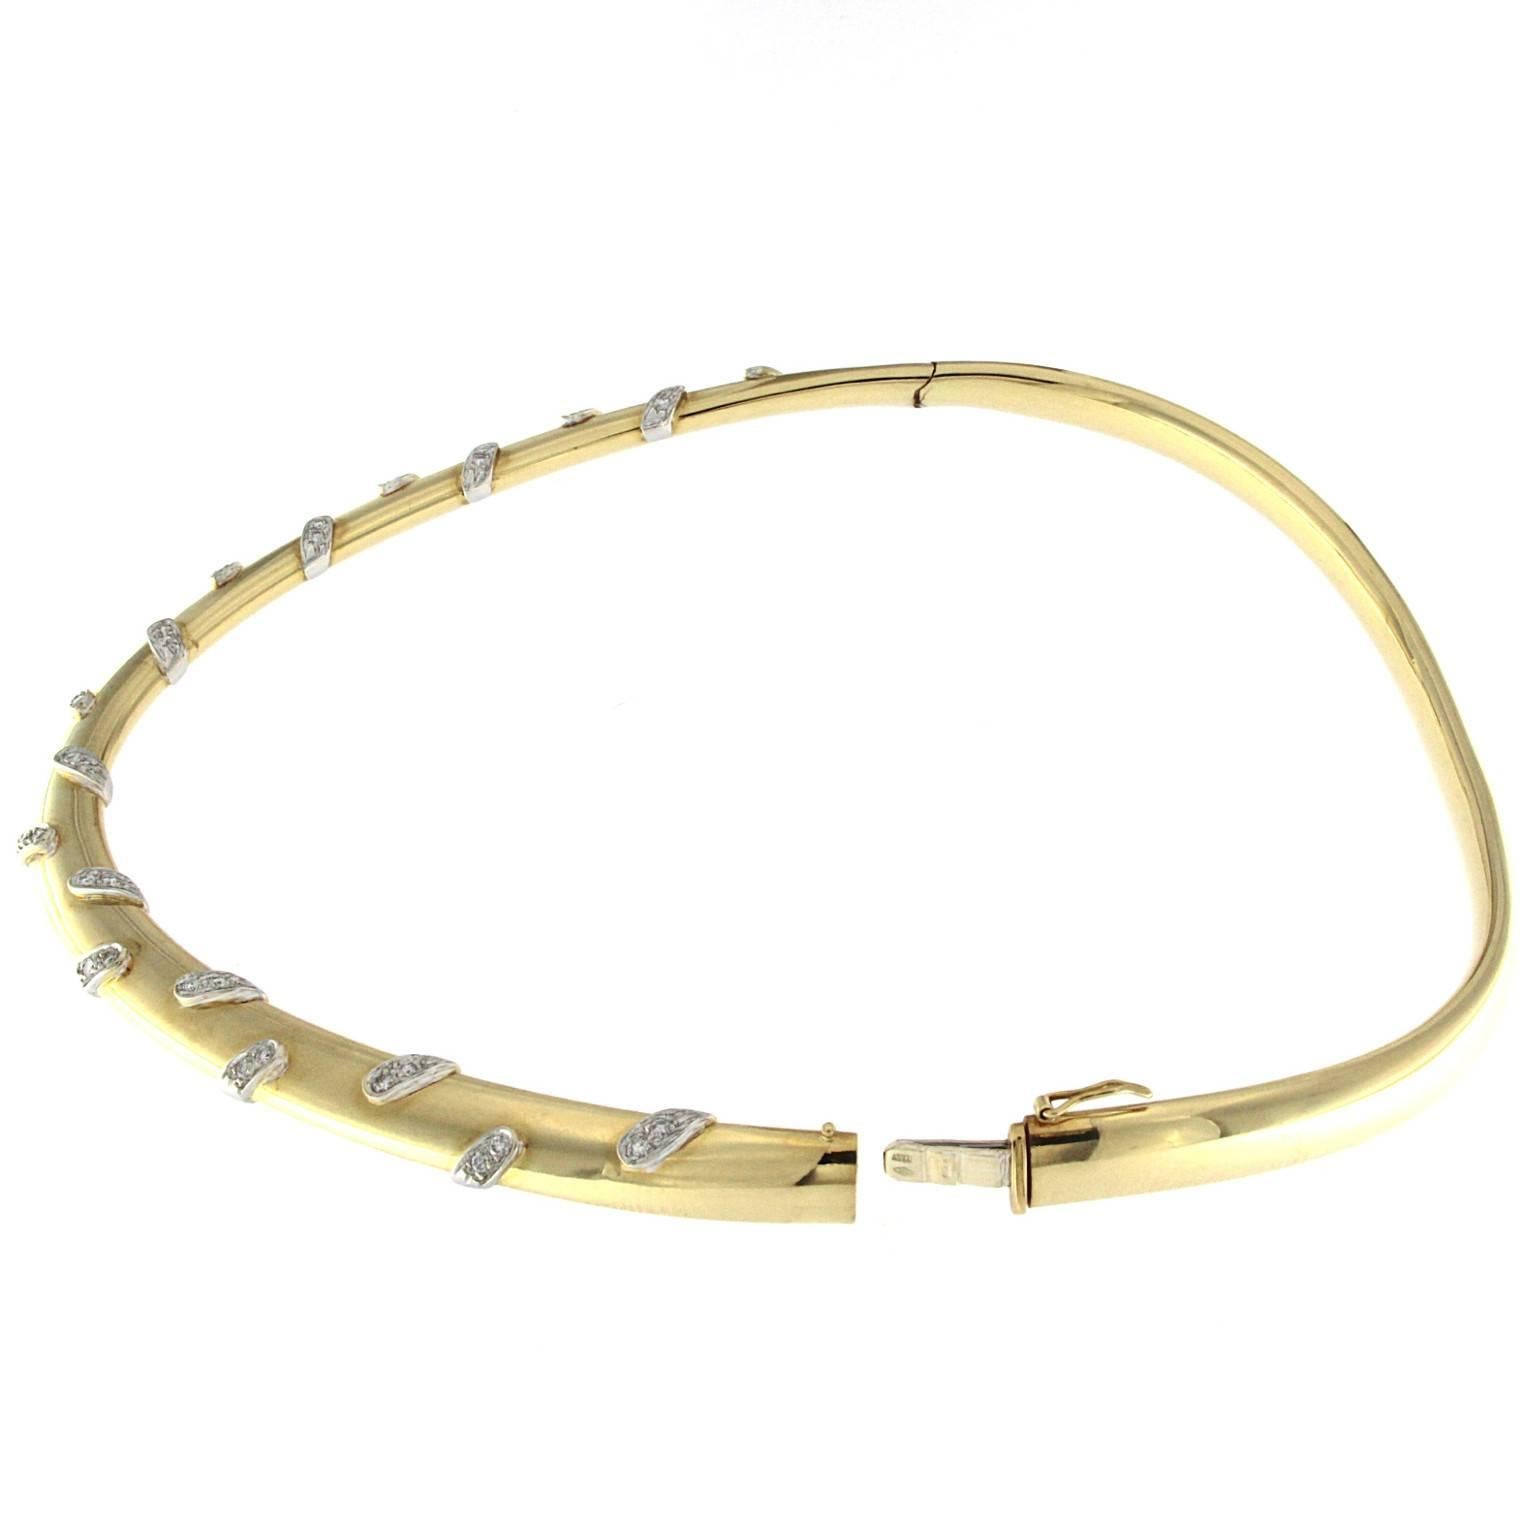 Brilliant Cut Rigid Collier in Yellow Gold, Blazed by White Parts Set with Diamonds For Sale